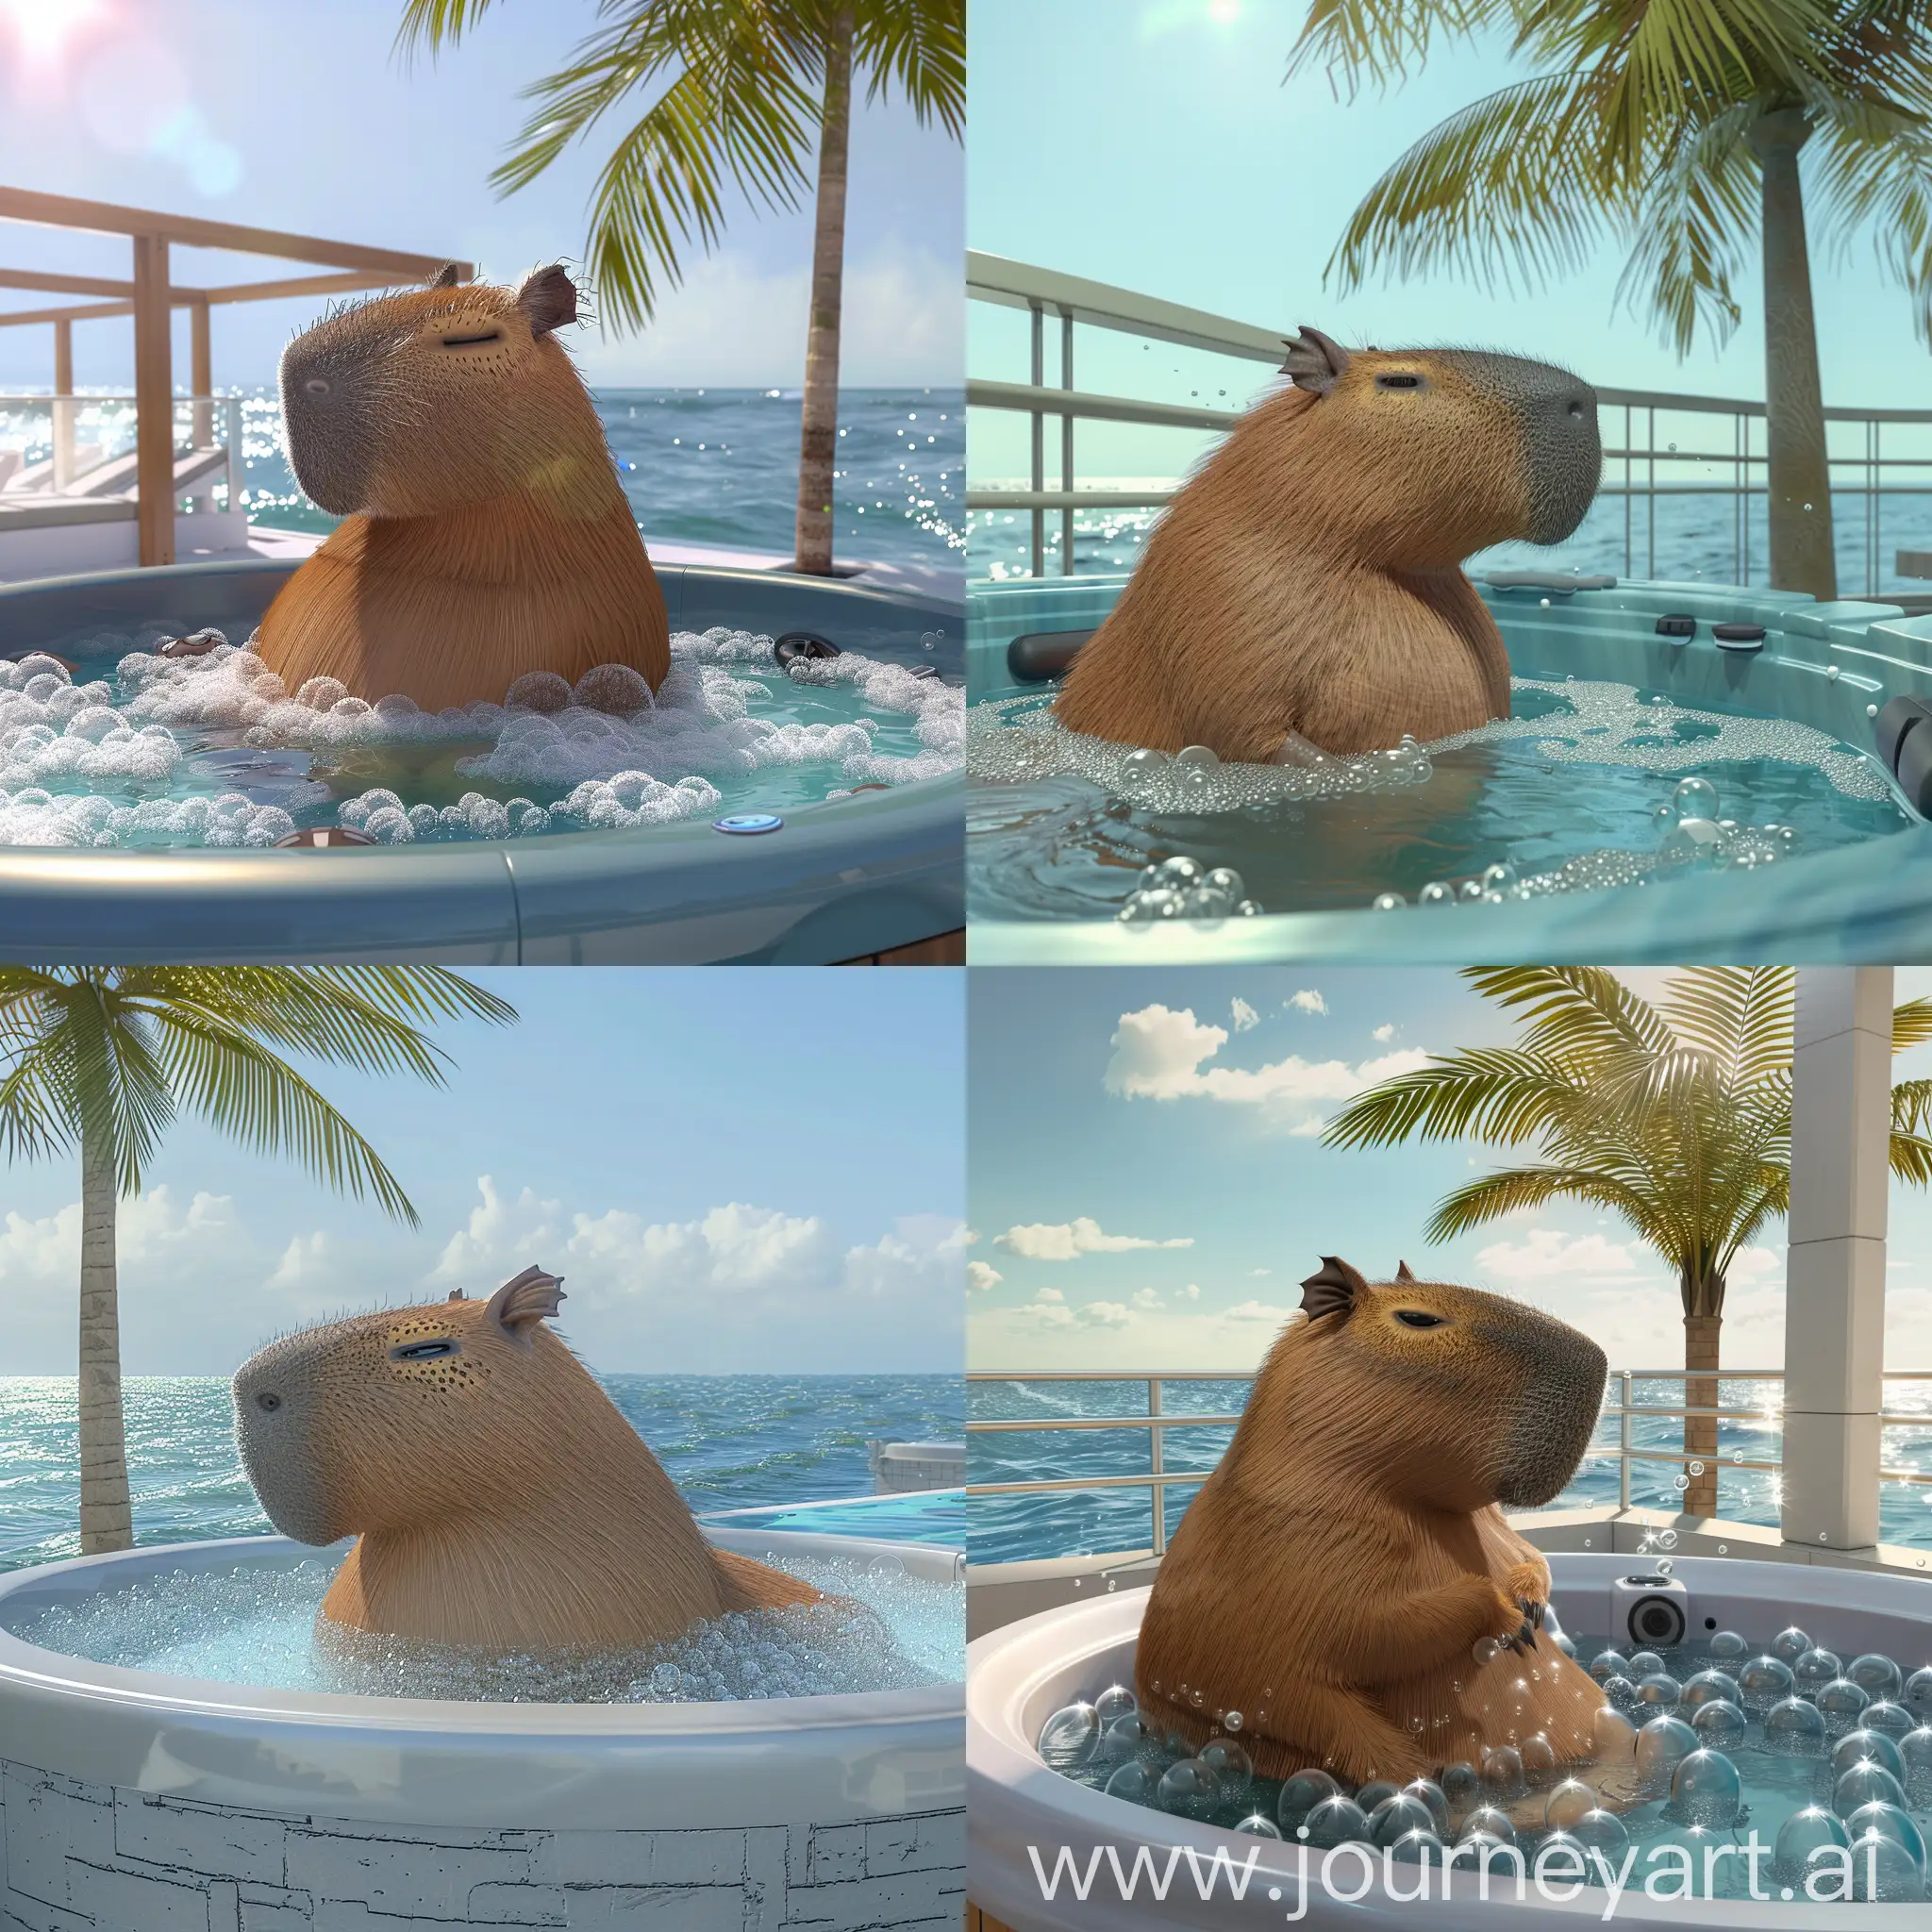 Capybara-Relaxing-in-Jacuzzi-at-Modern-Beachside-Home